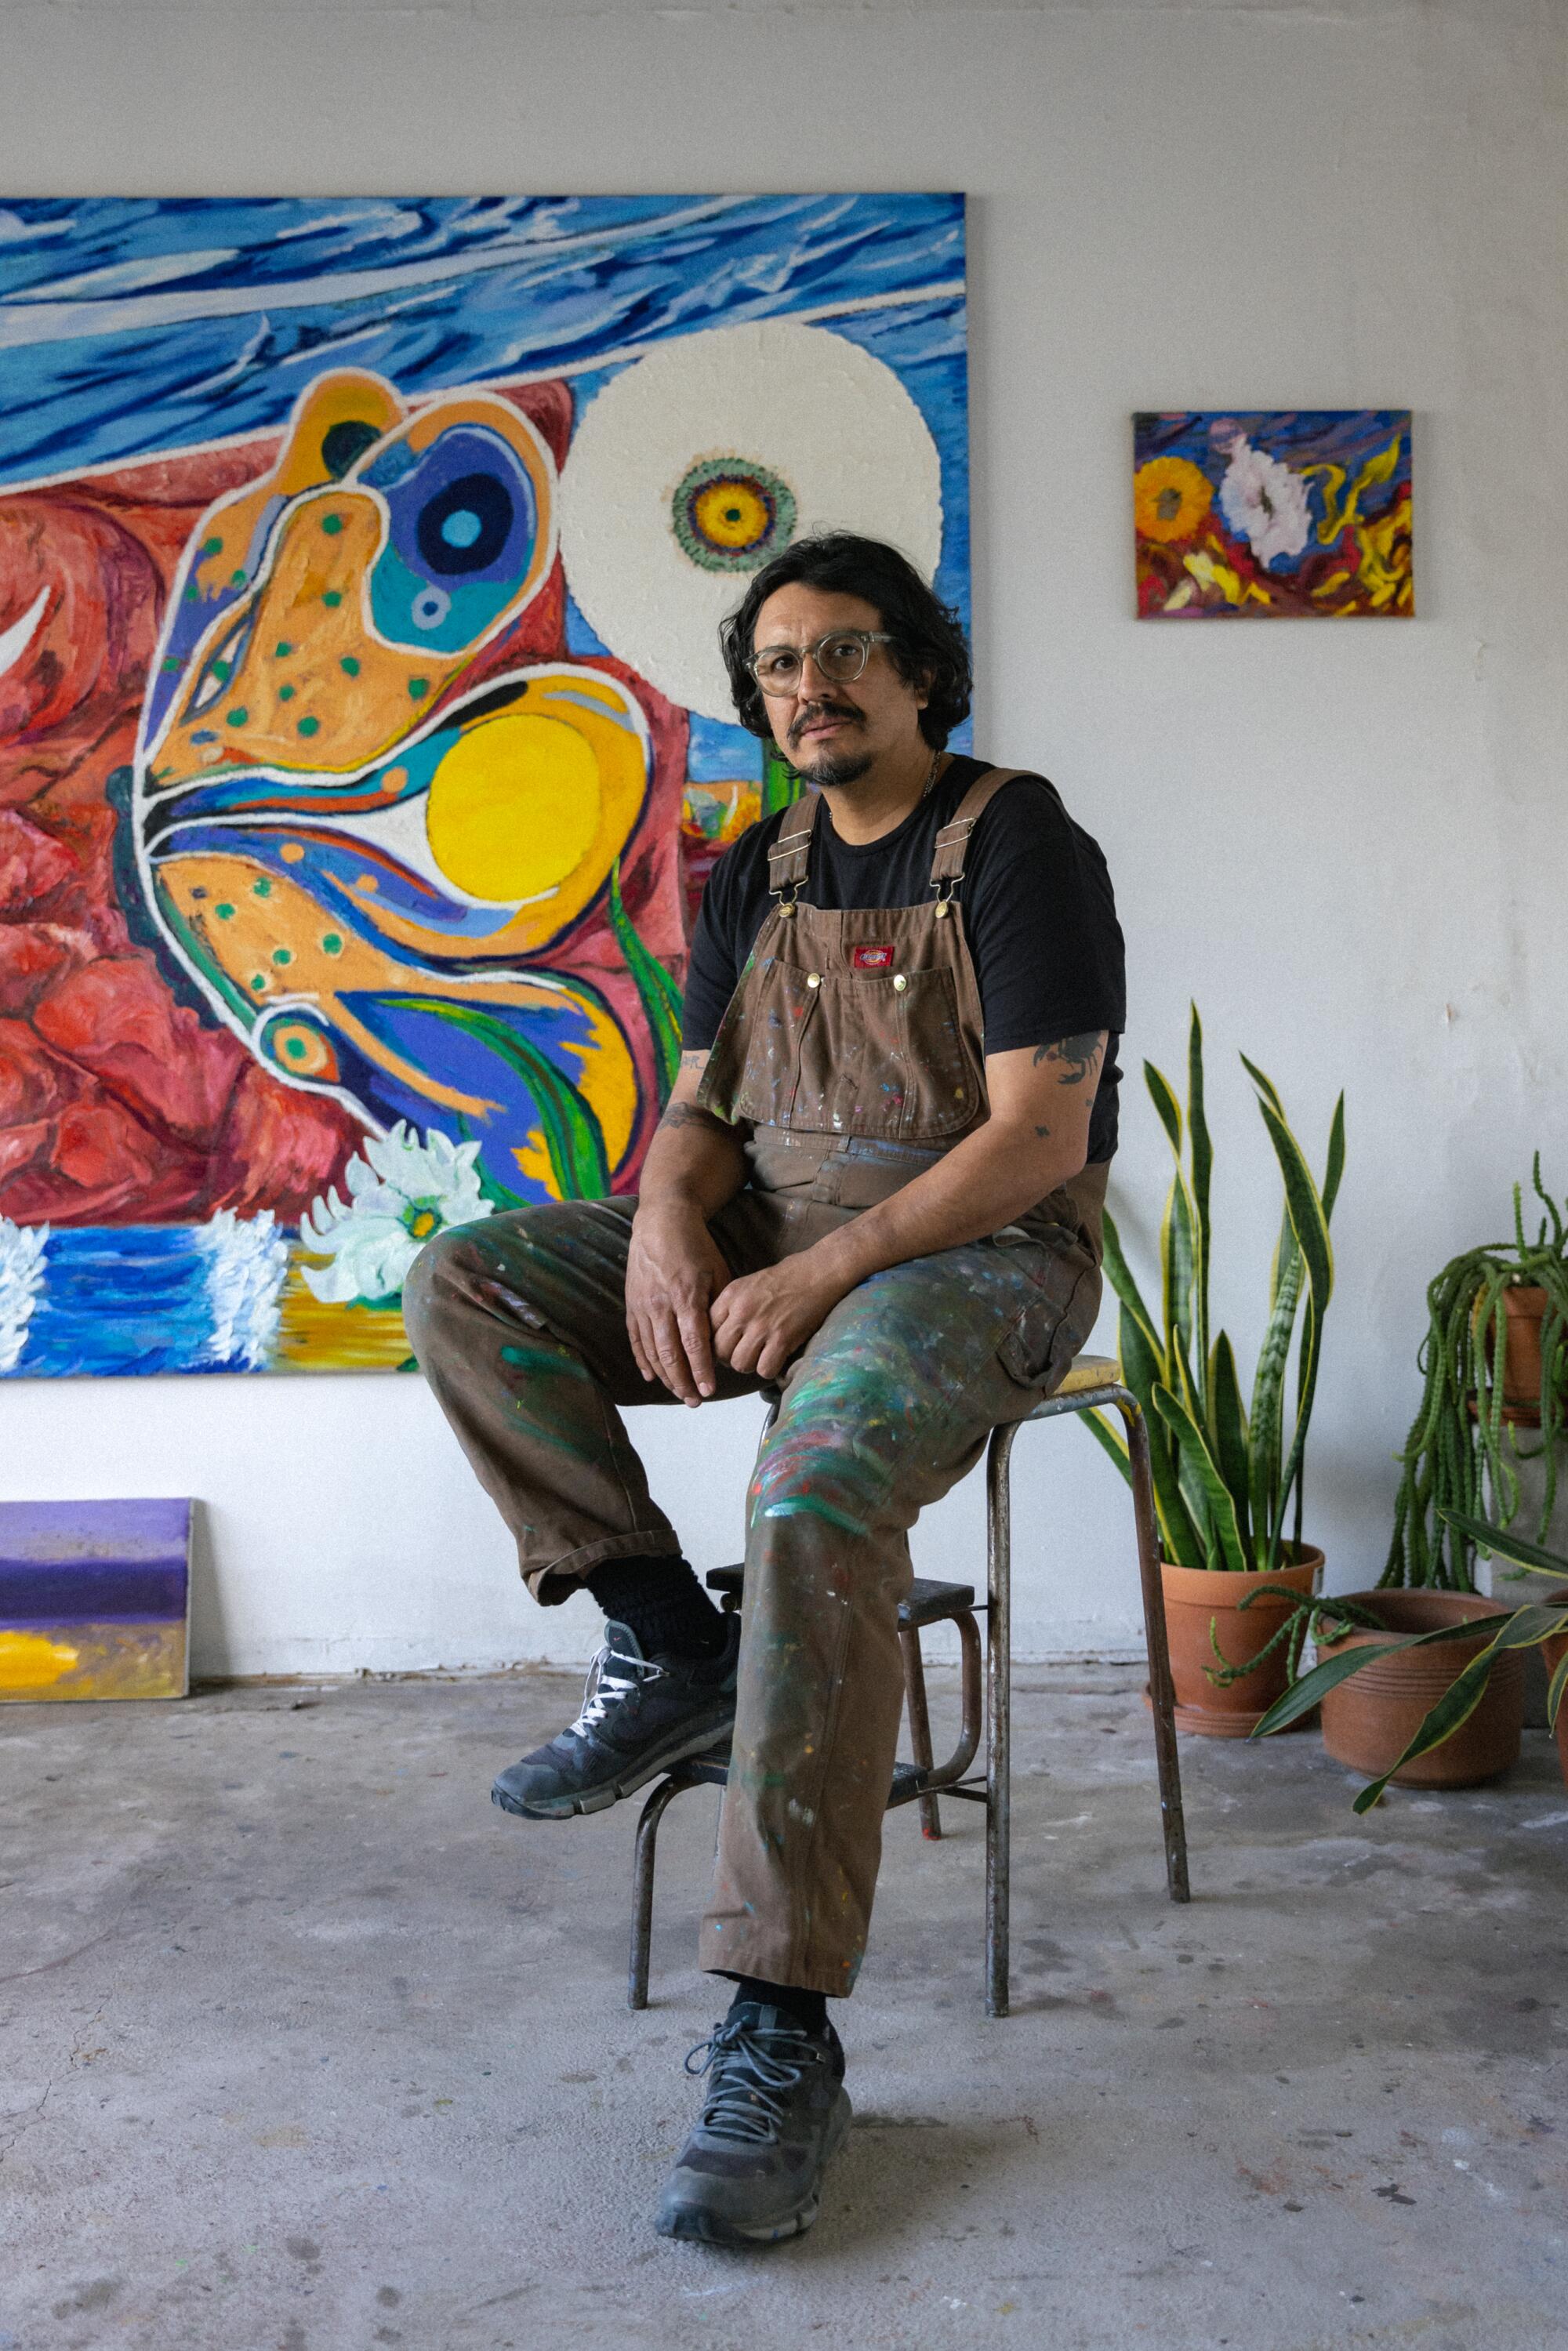 Daniel Gibson’s butterfly paintings tell a different side of migration